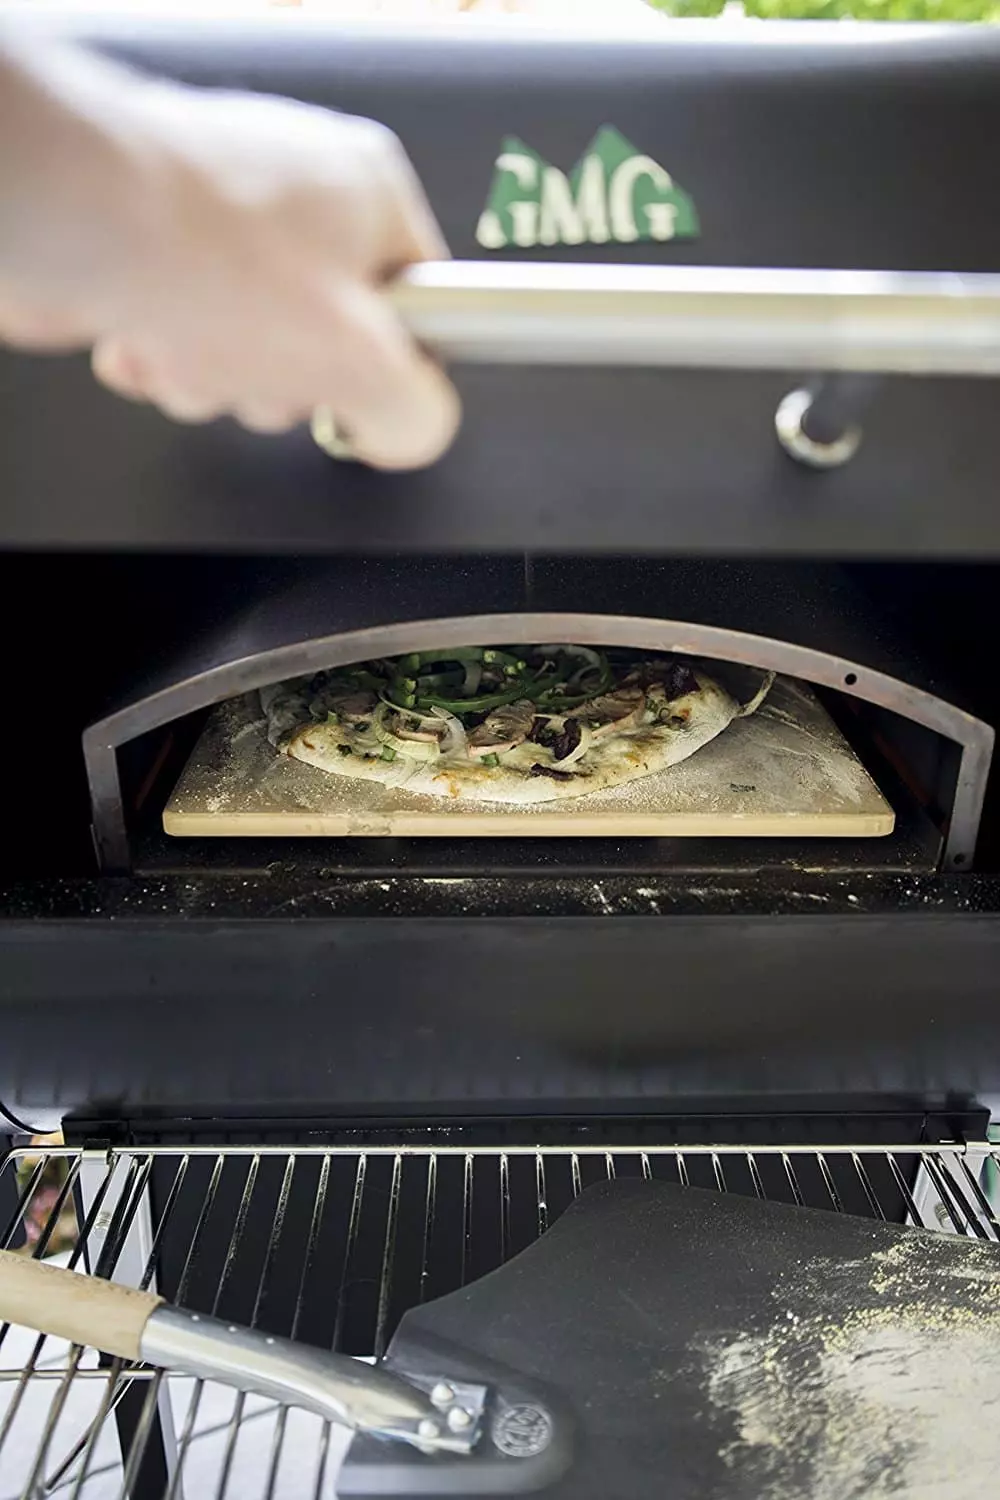 Convert an outdoor grill into a pizza oven